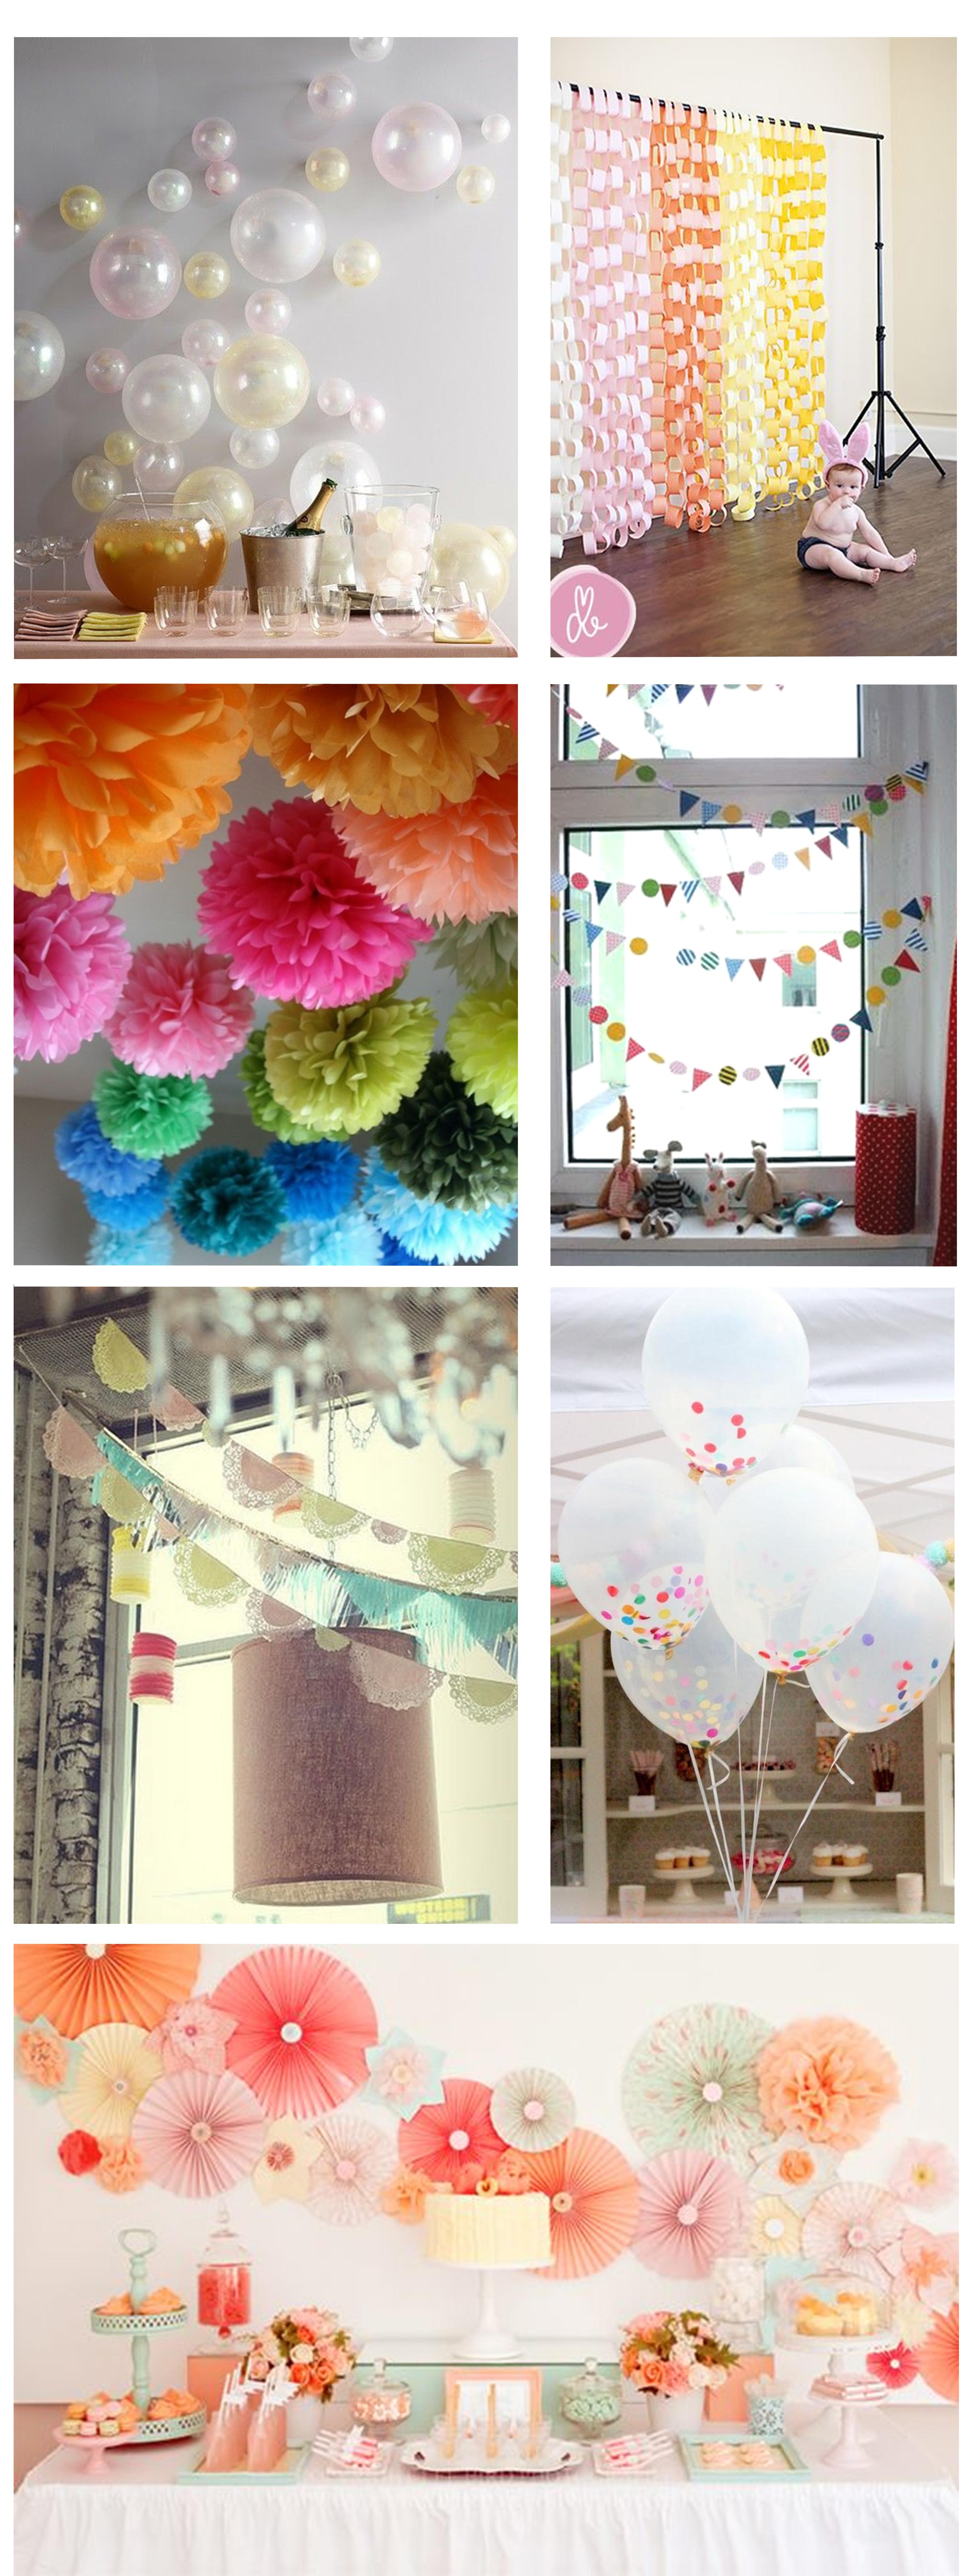 Ideas for home-made party decorations